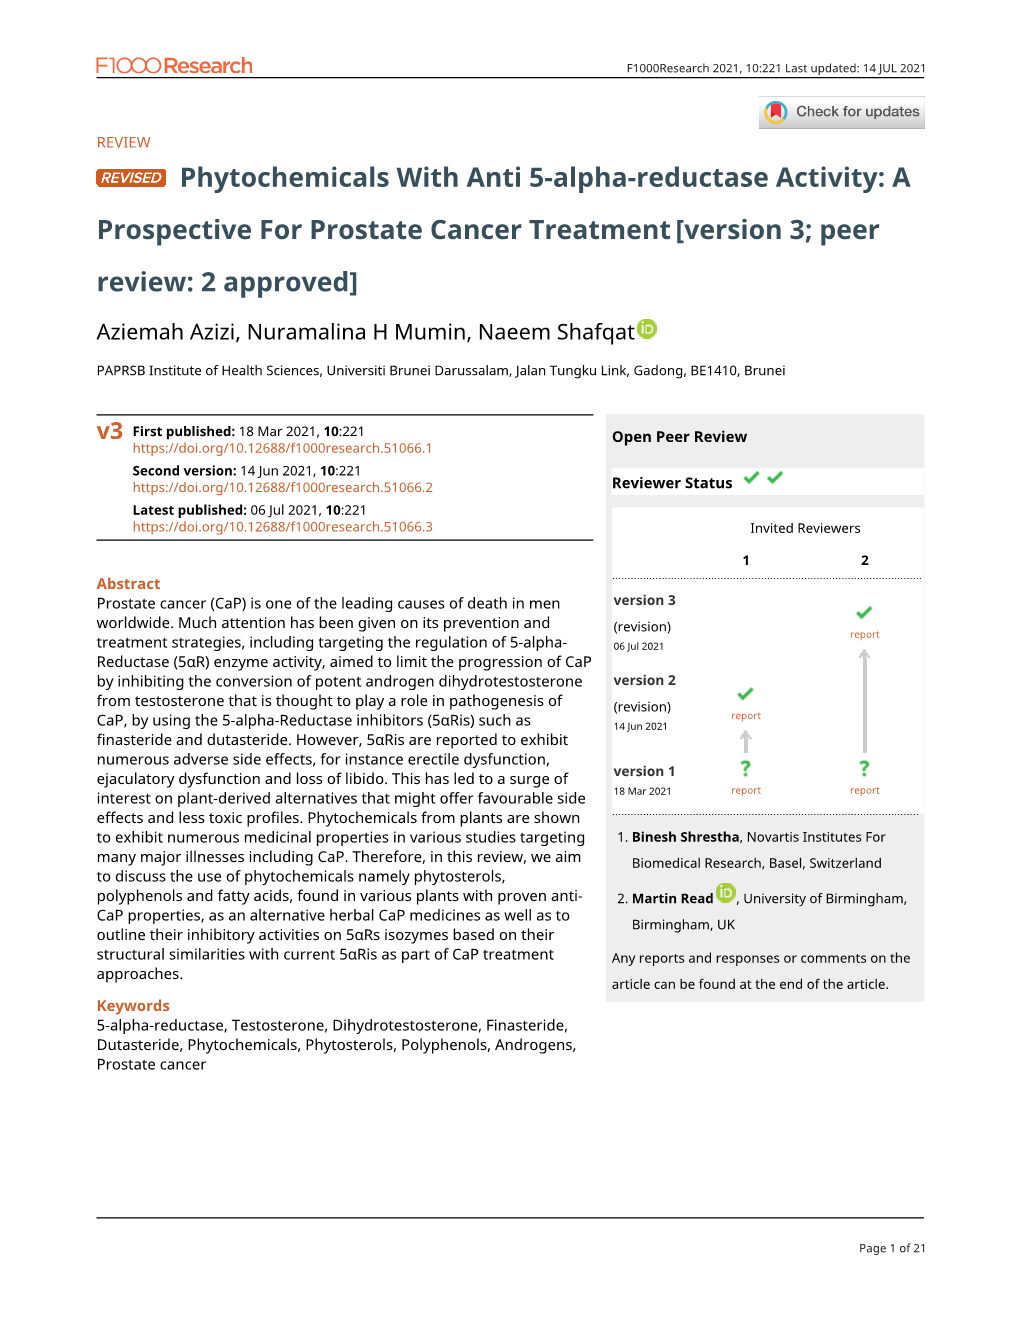 Phytochemicals with Anti 5-Alpha-Reductase Activity: A